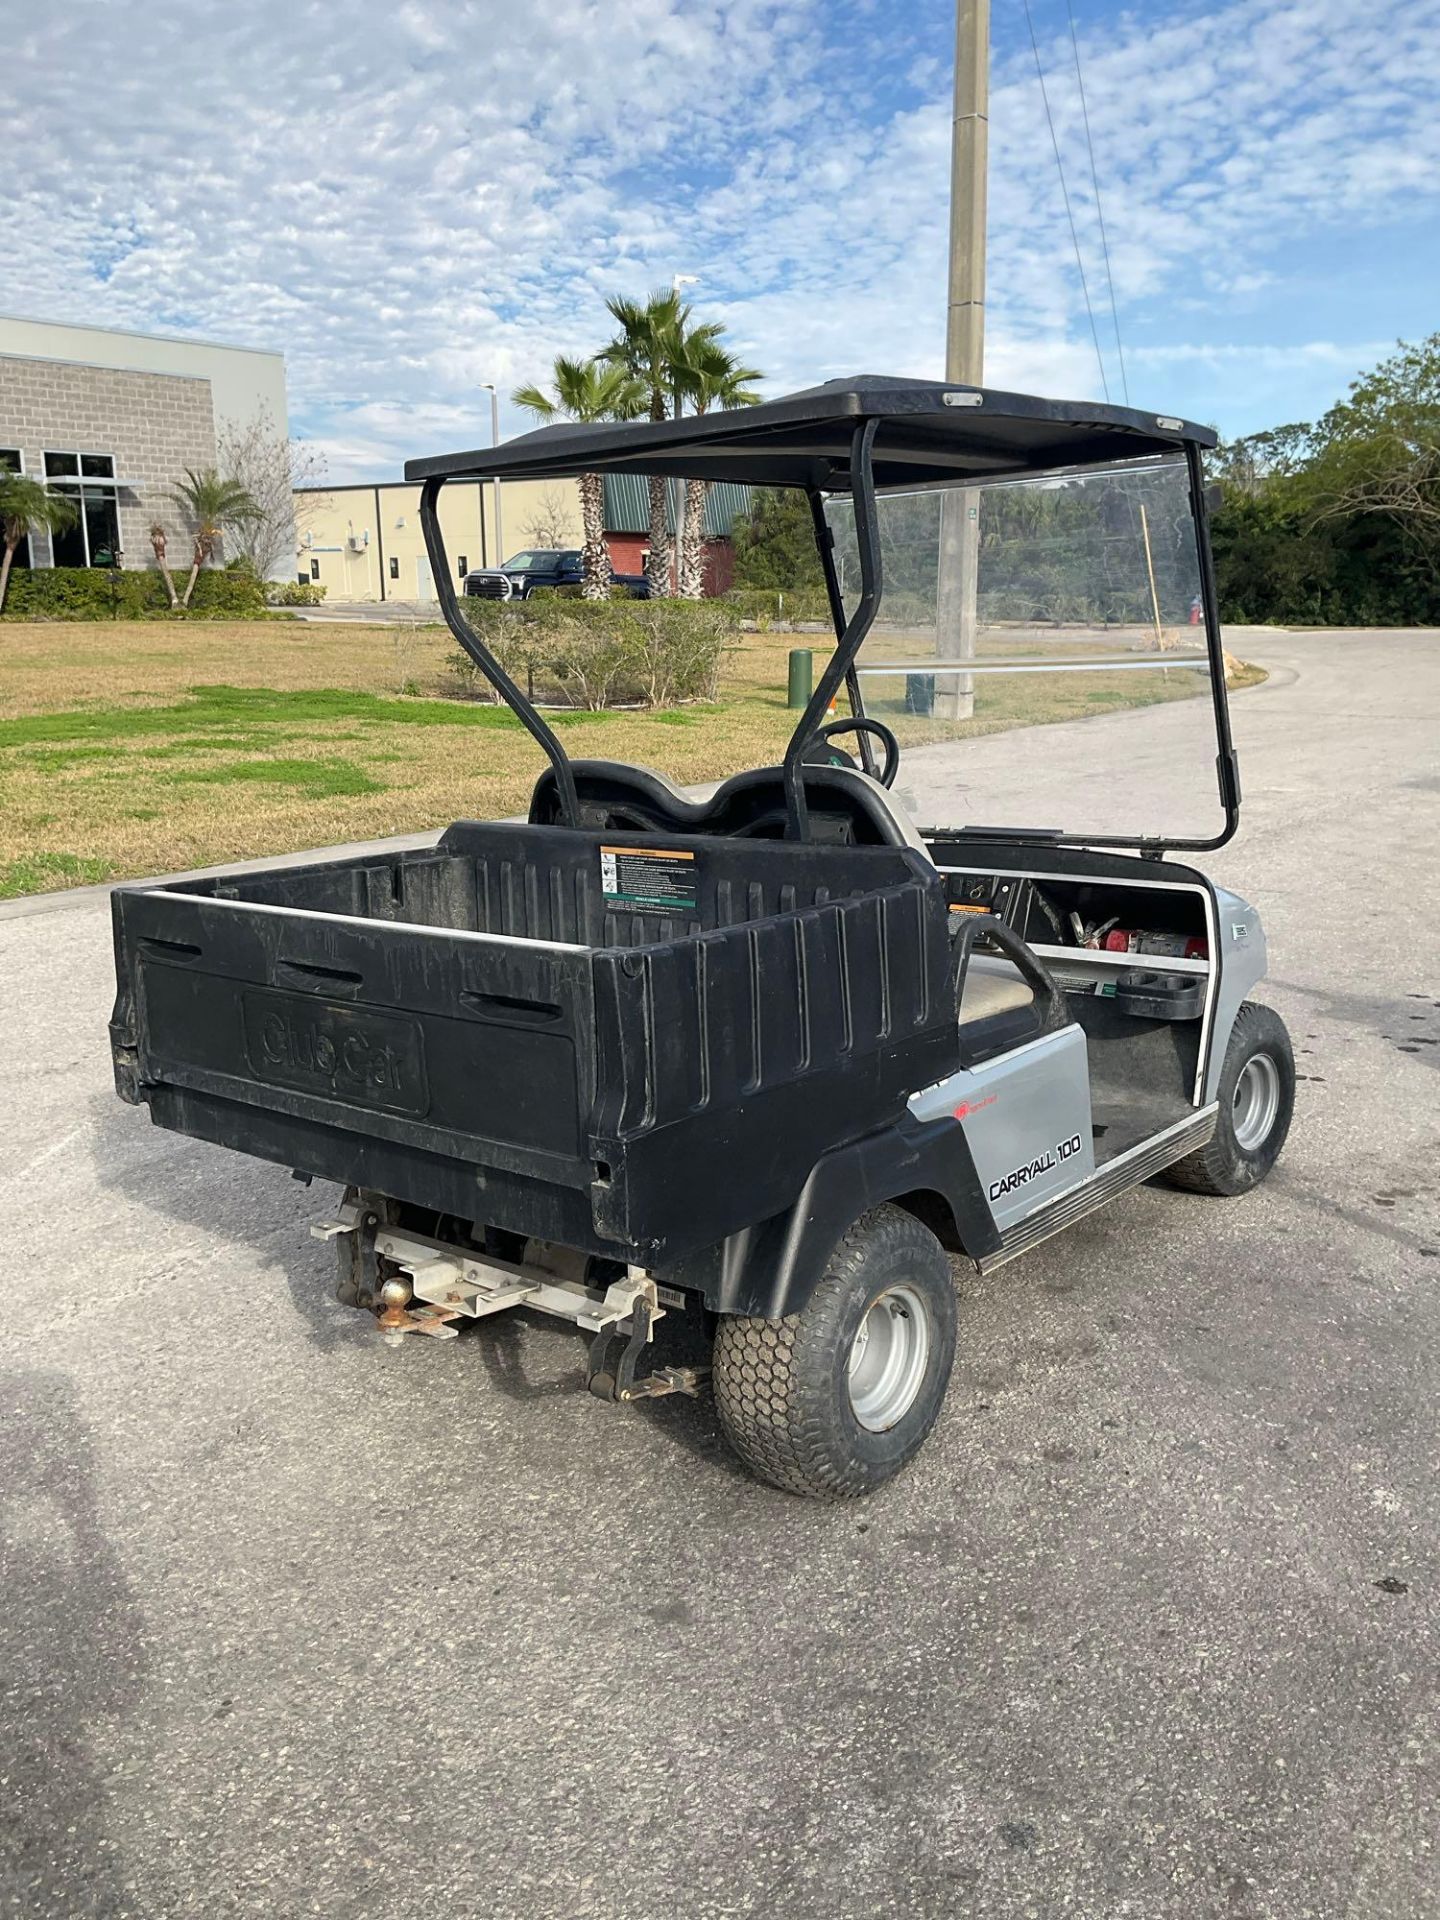 2019 CLUB CAR CARRYALL 100 GOLF CART MODEL FC, ELECTRIC, MANUAL DUMP BED,BILL OF SALE ONLY, - Image 7 of 11